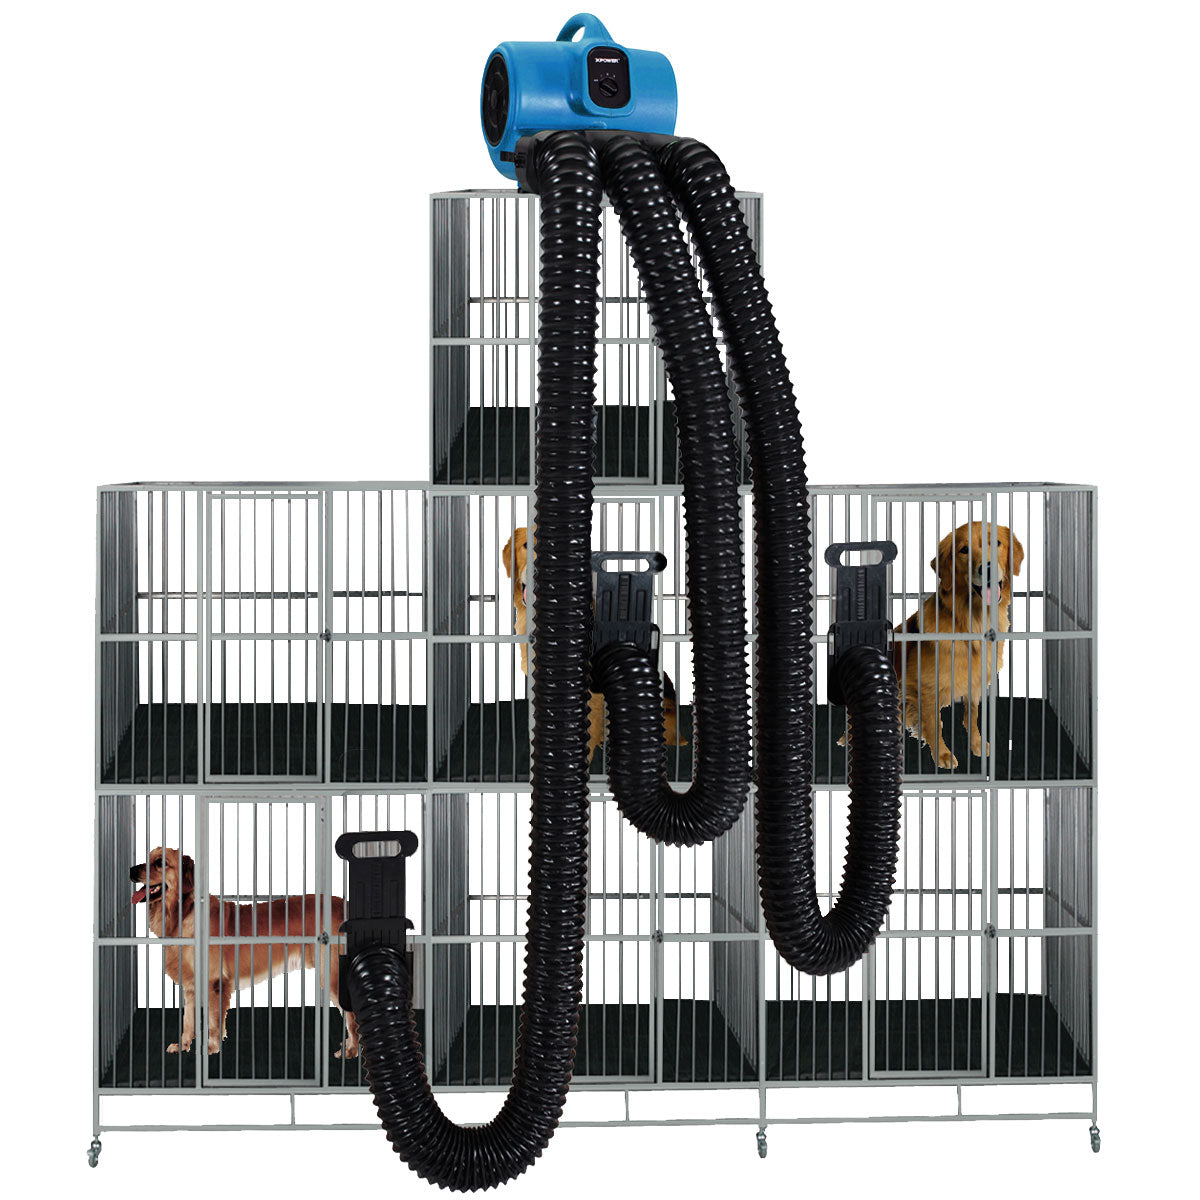 XPOWER X-430TF+MDK Professional Cage Dryer with Multi-Drying Hose Kit (1/3 HP)